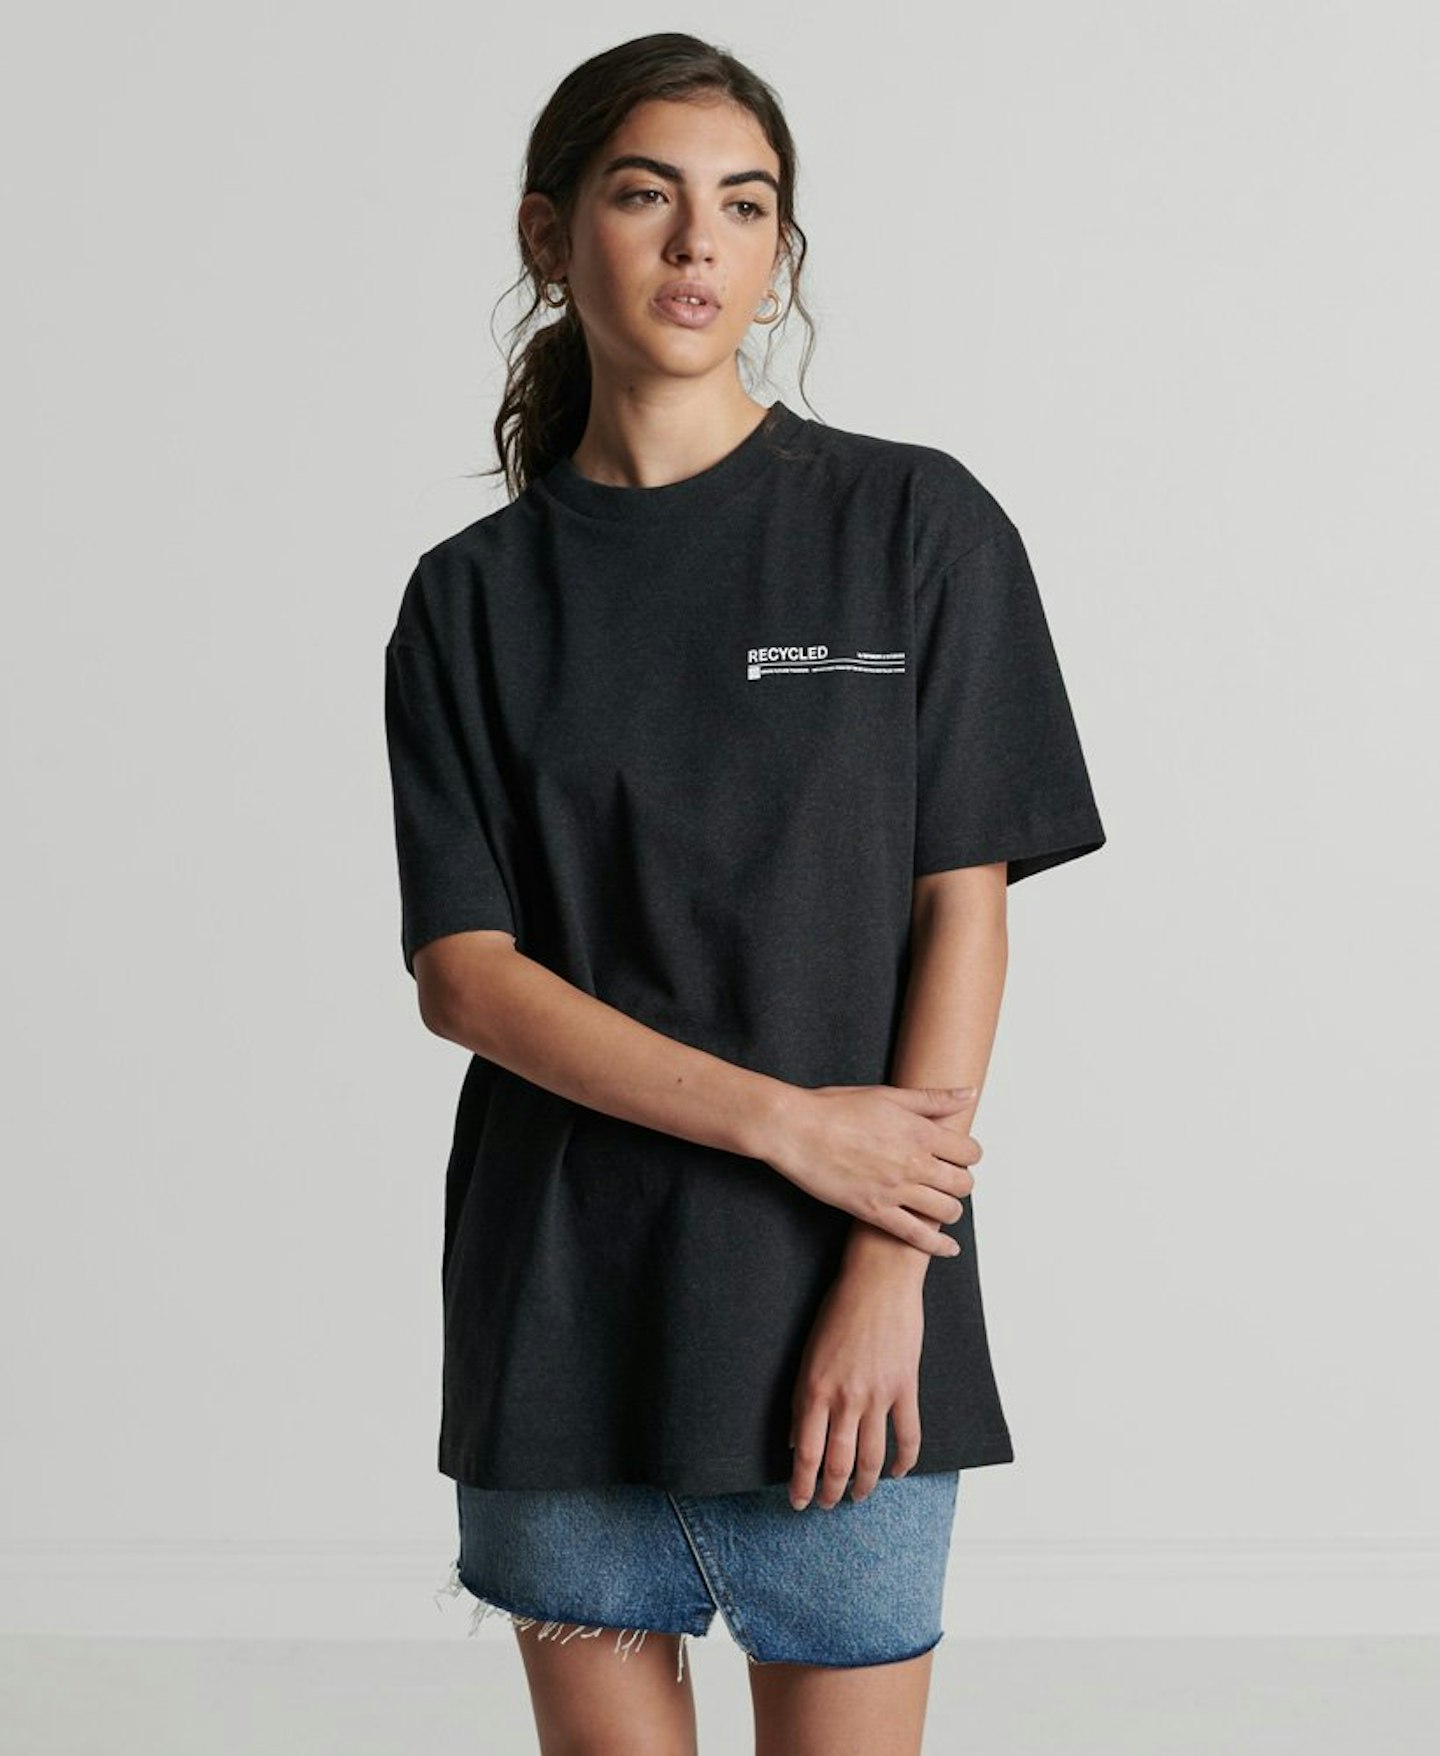 SUPERDRY, Recycled Micro Top T-Shirt, £24.99